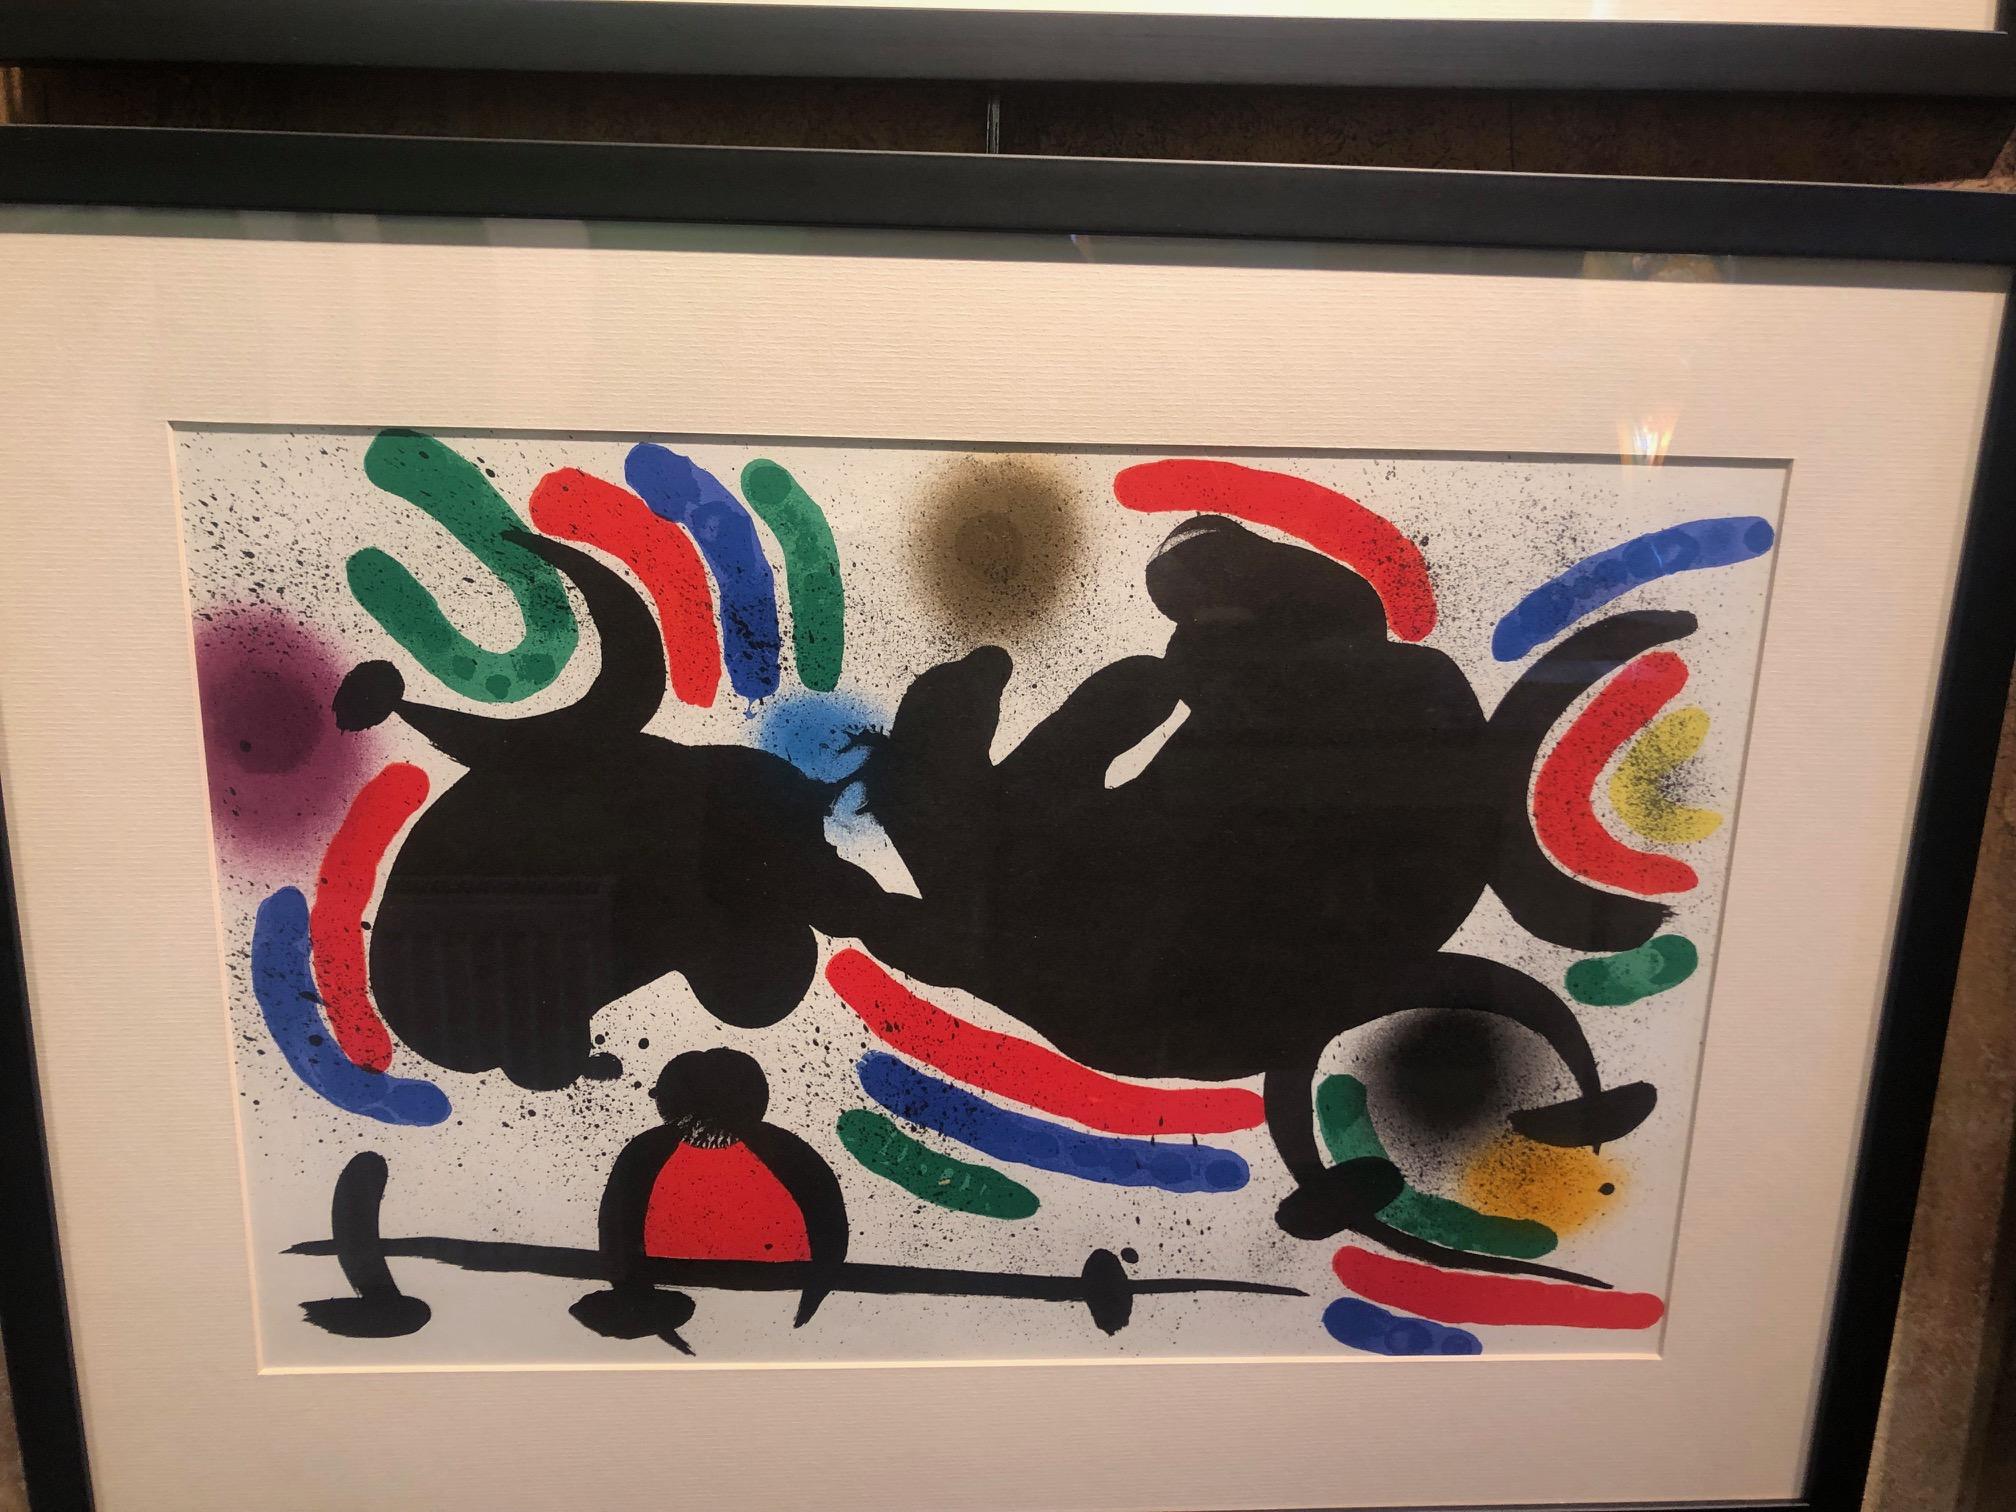 Untitled abstract and colourful limited edition lithograph by Miro